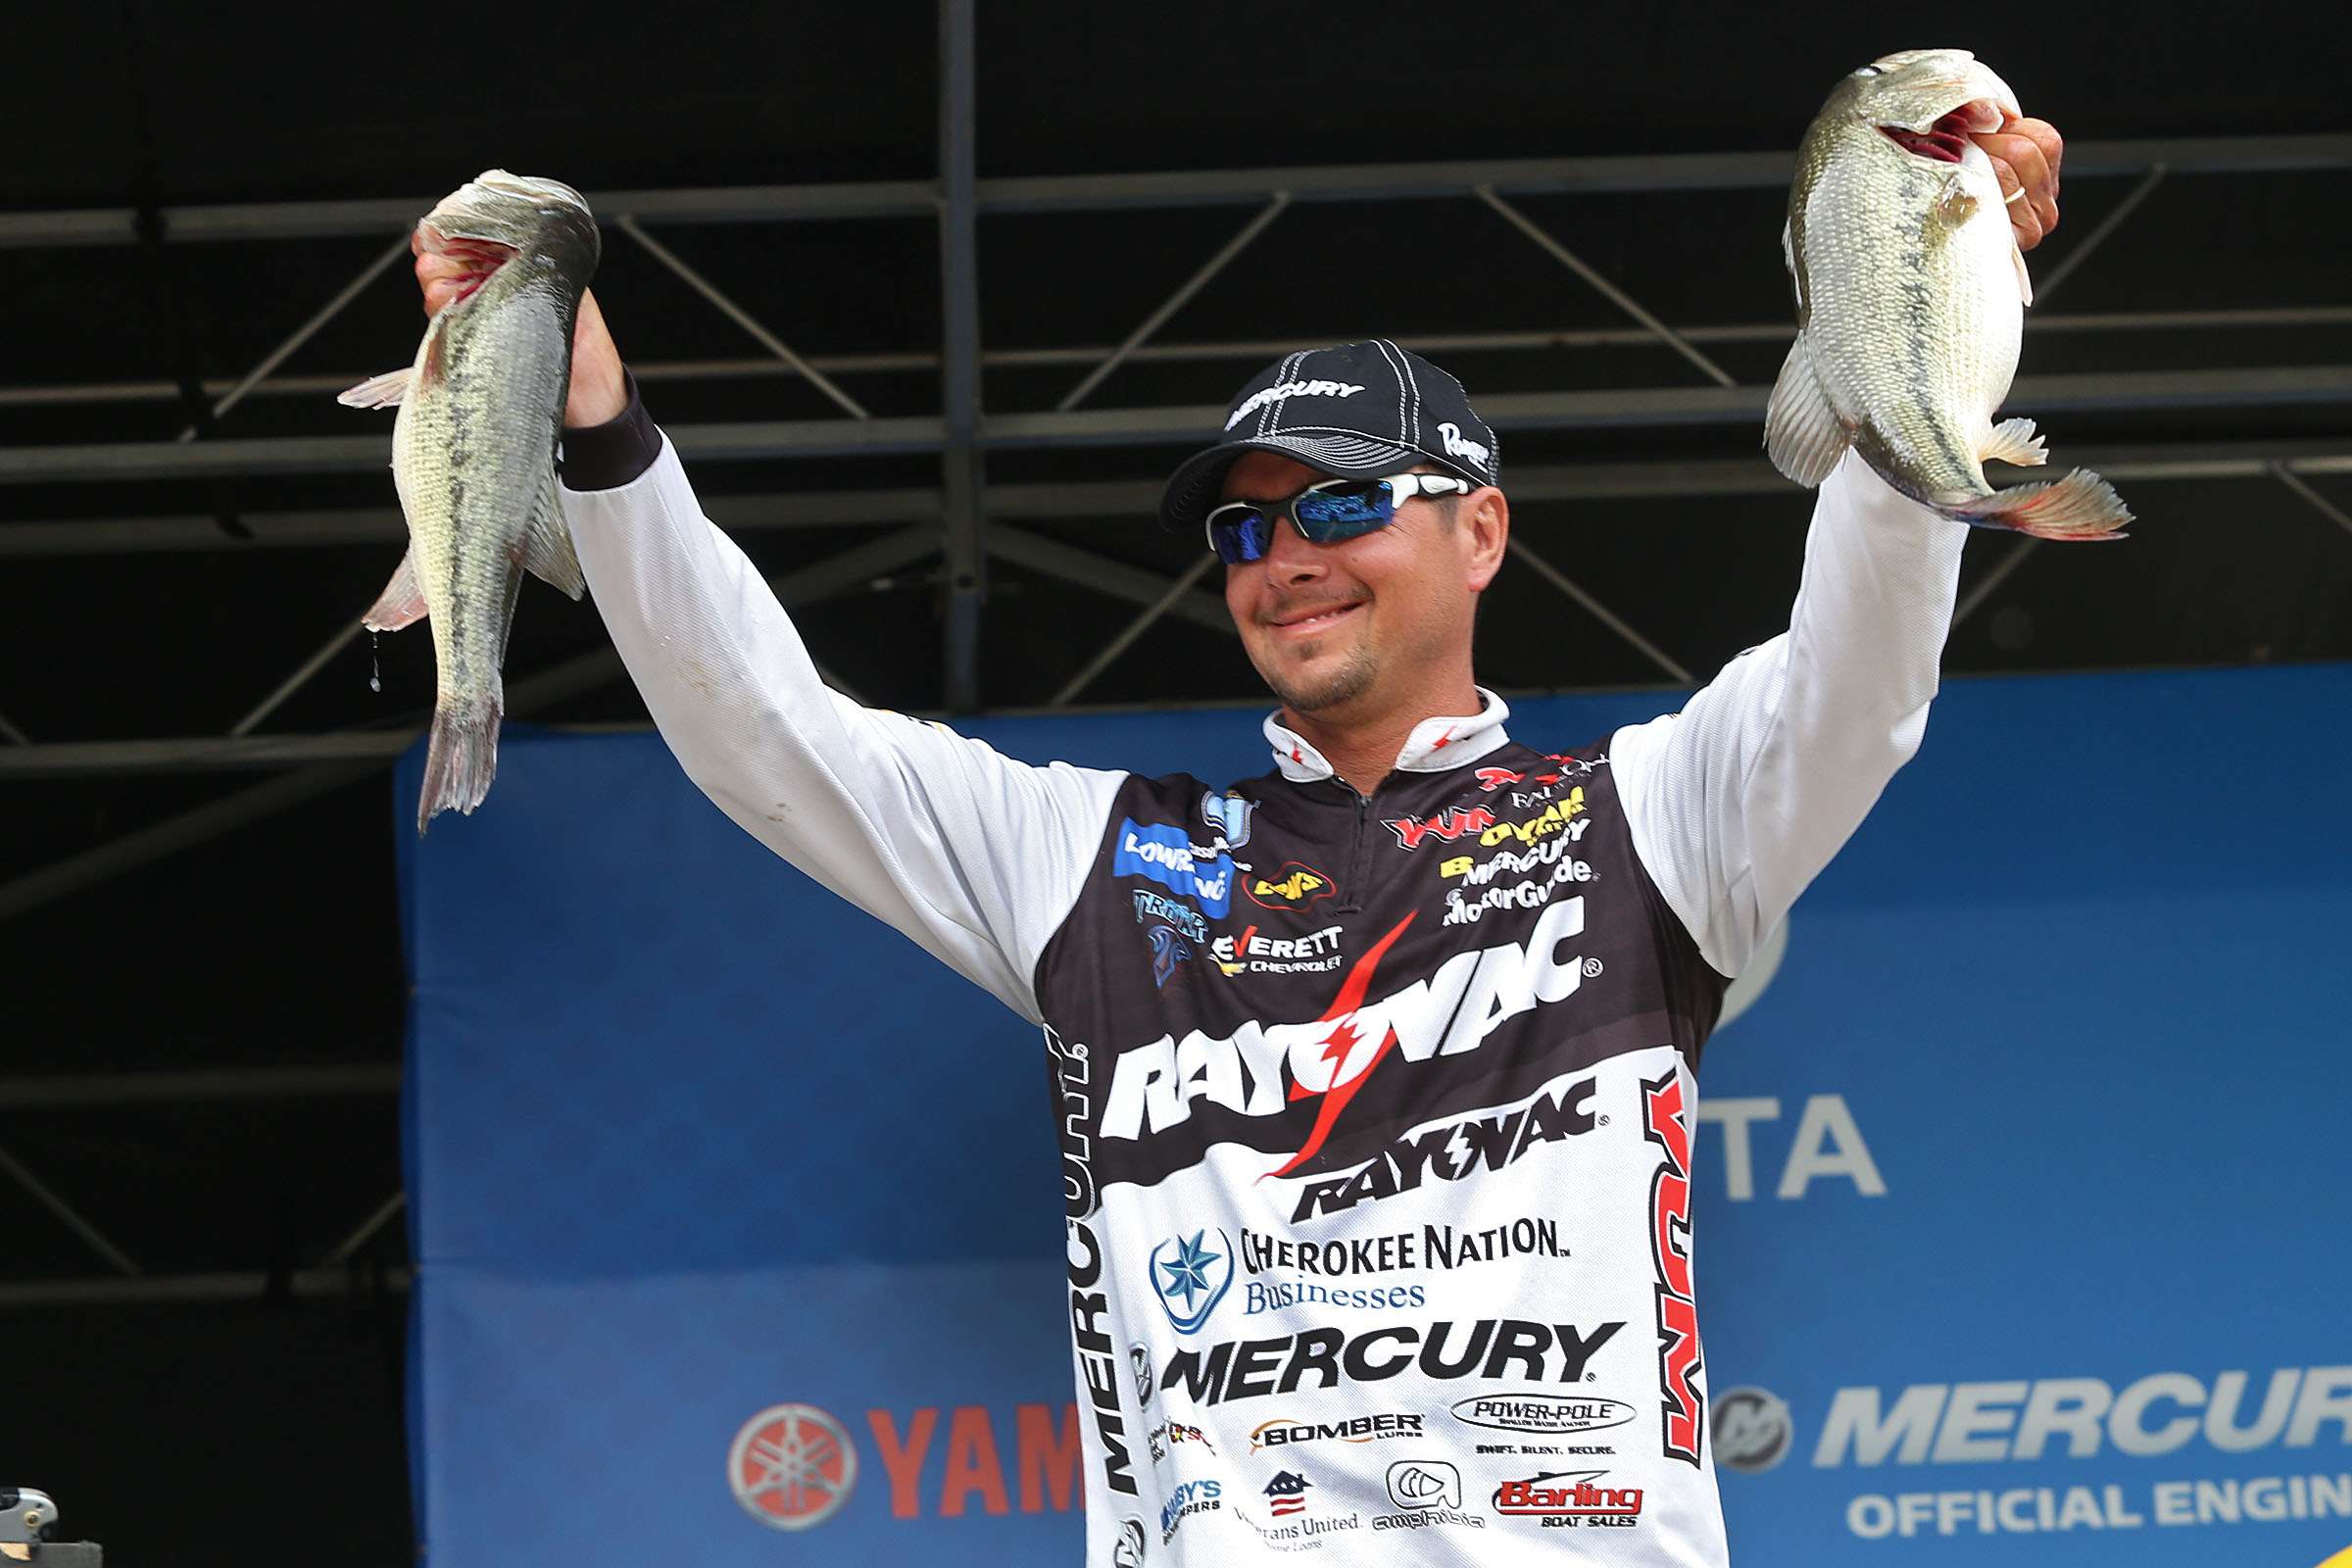 During 2013, his rookie year on the Elite Series, Christie won his first Elite Series event at Bull Shoals Lake. The previous week, he won an FLW event at Beaver Lake, giving him a two-tournament total of $228,000 in winnings on the two Arkansas White River-chain lakes.